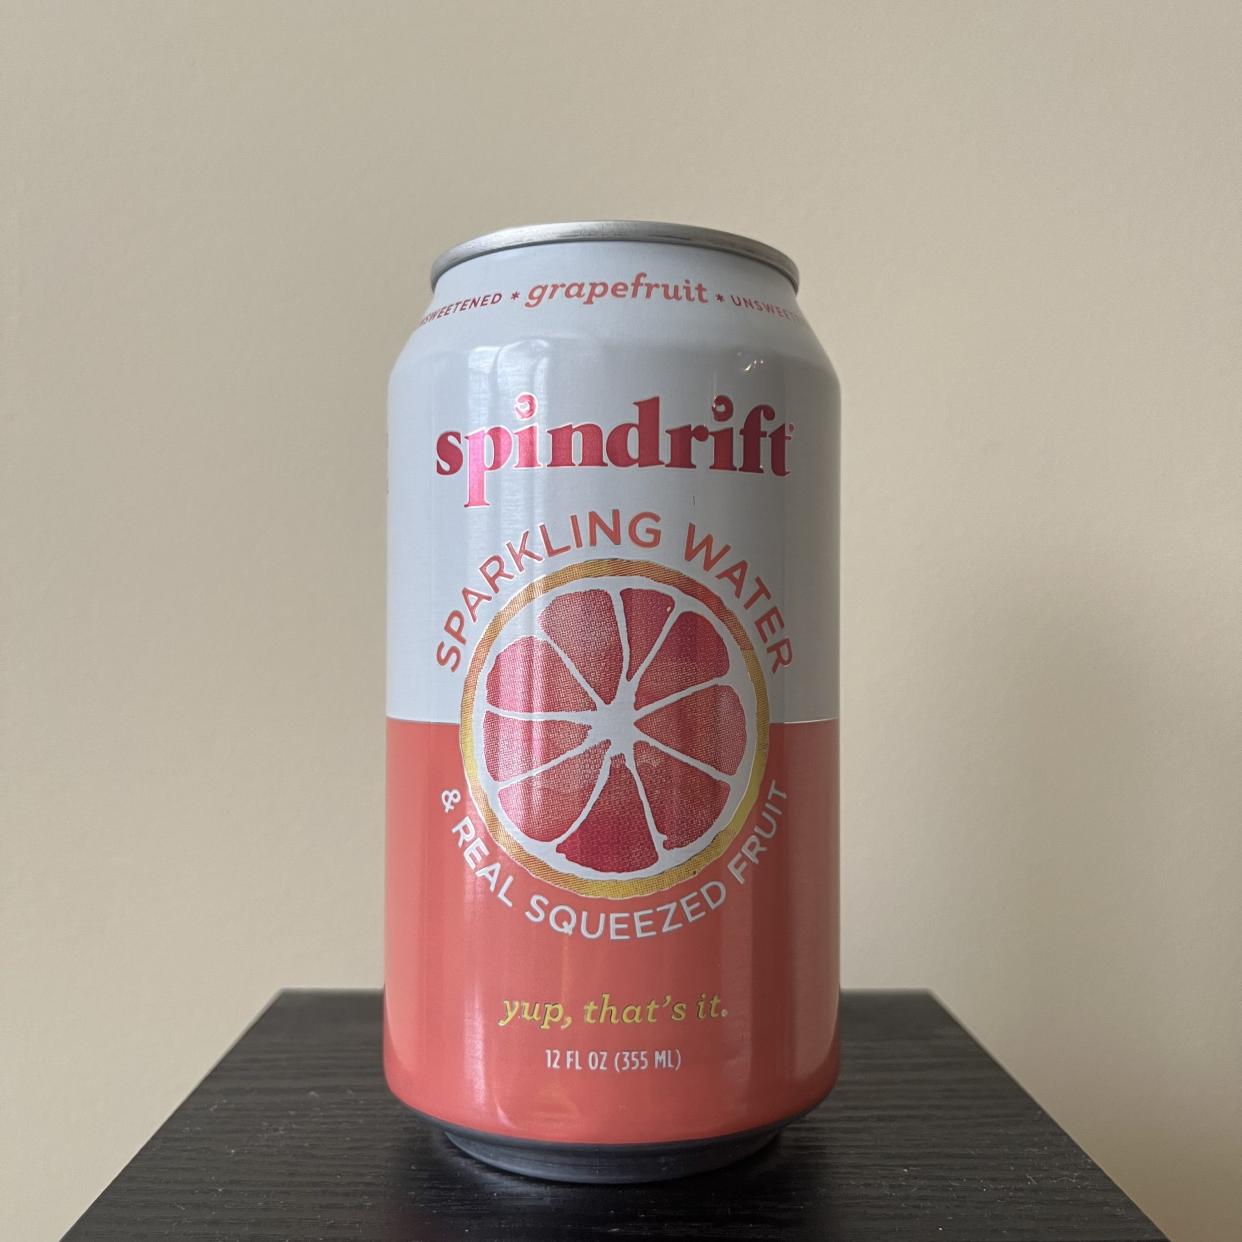 a can of spindrift grapefruit